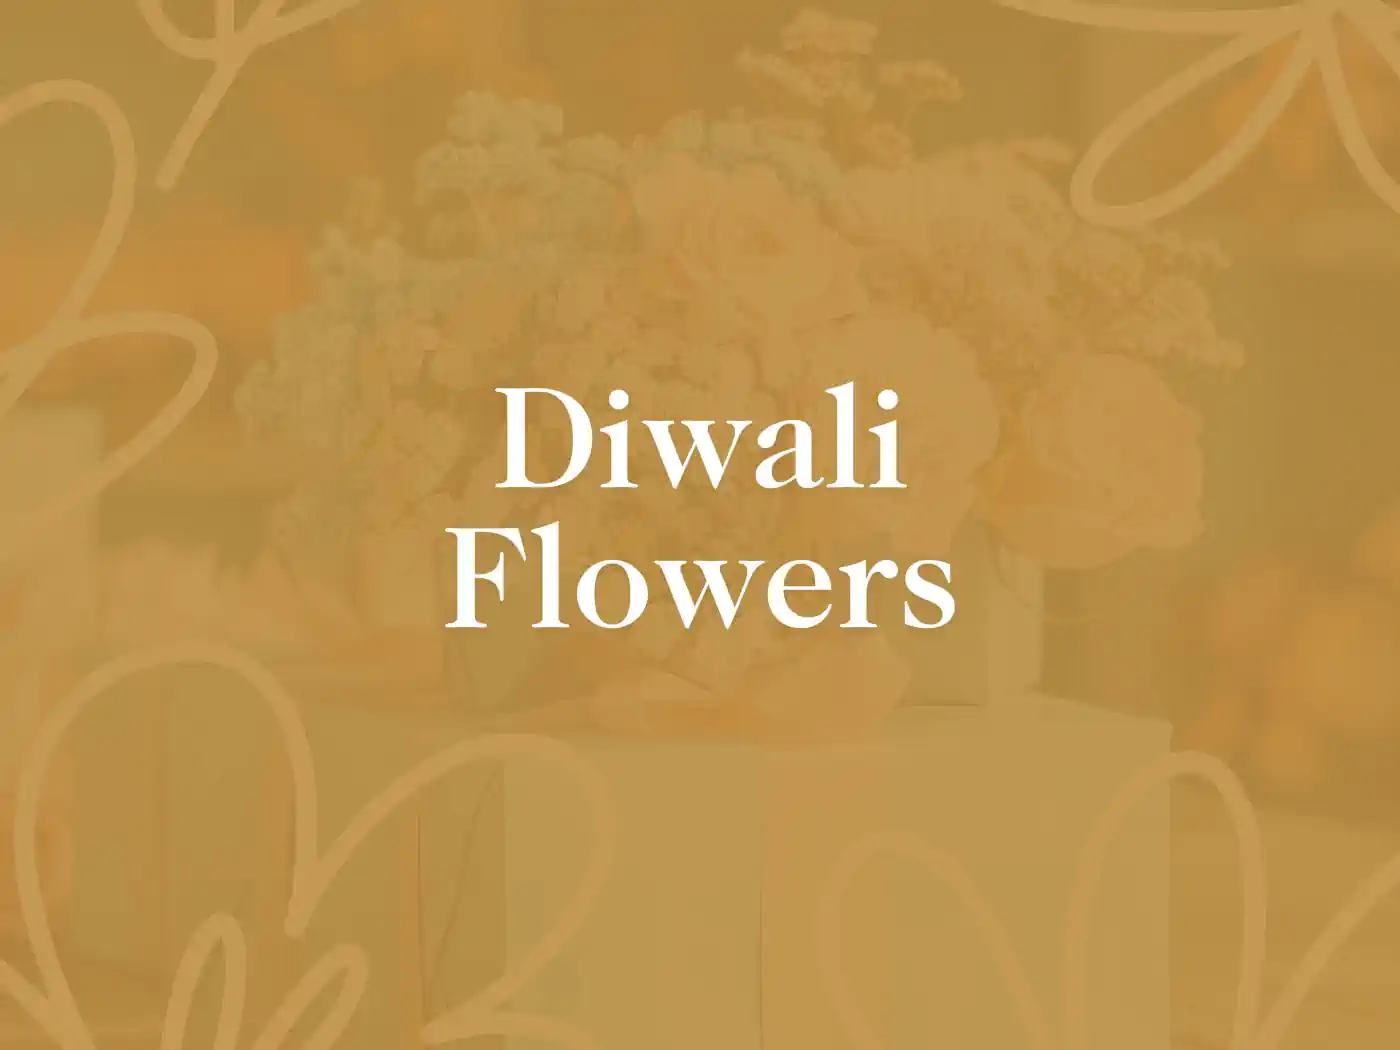 Soft focus image of a bouquet of flowers in muted orange tones with the text 'Diwali Flowers' prominently displayed, creating an elegant and festive background. Fabulous Flowers and Gifts - Diwali Flowers. Delivered with Heart.